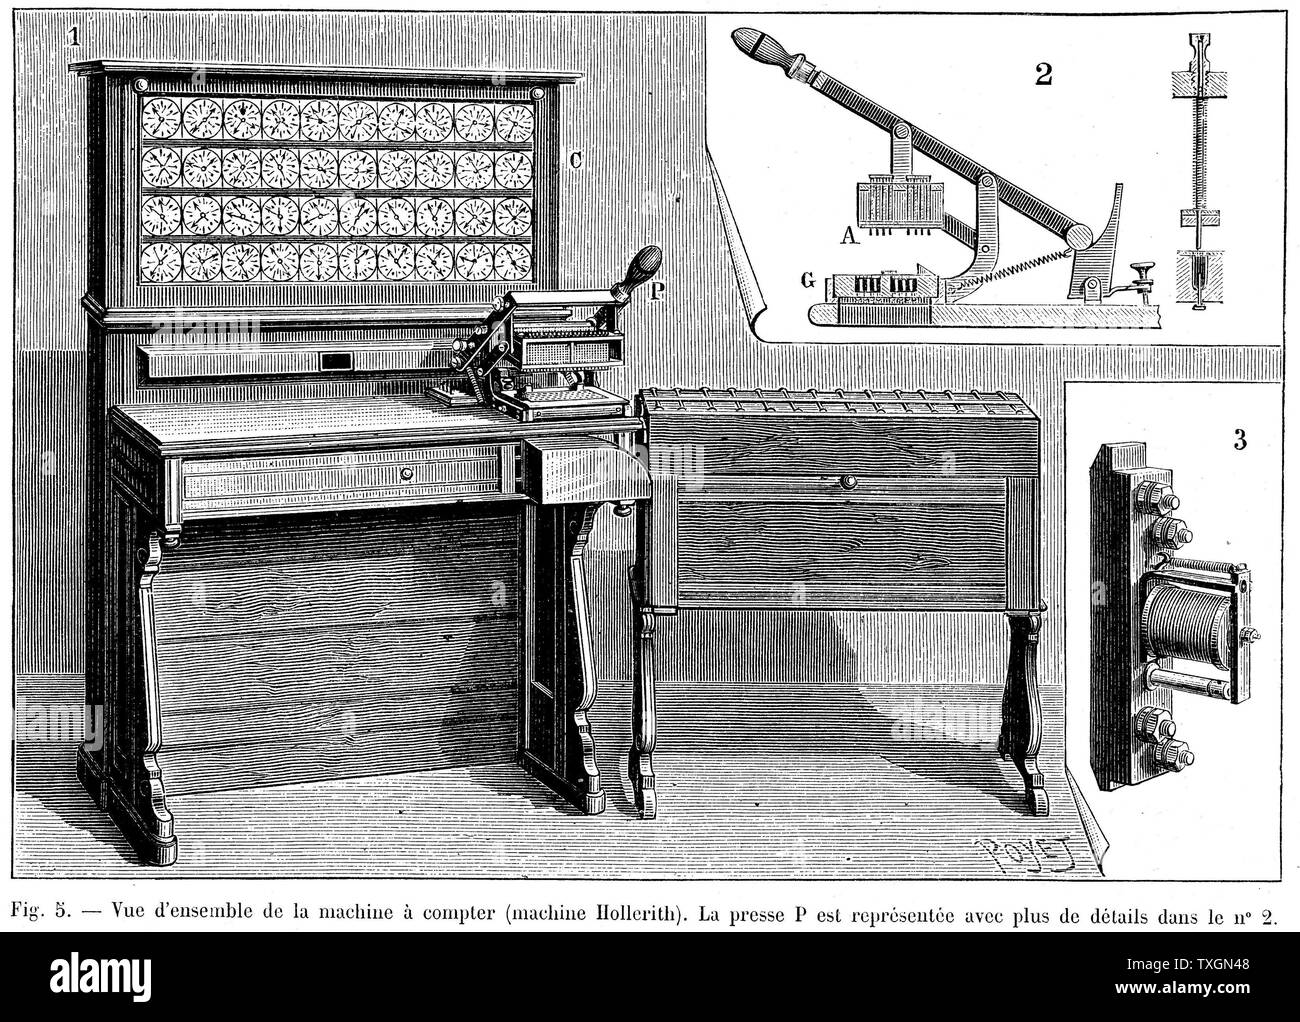 Hollerith tabulator which used a punched card memory system. First used in the US census of 1890 Engraving, Paris, 1894 Stock Photo